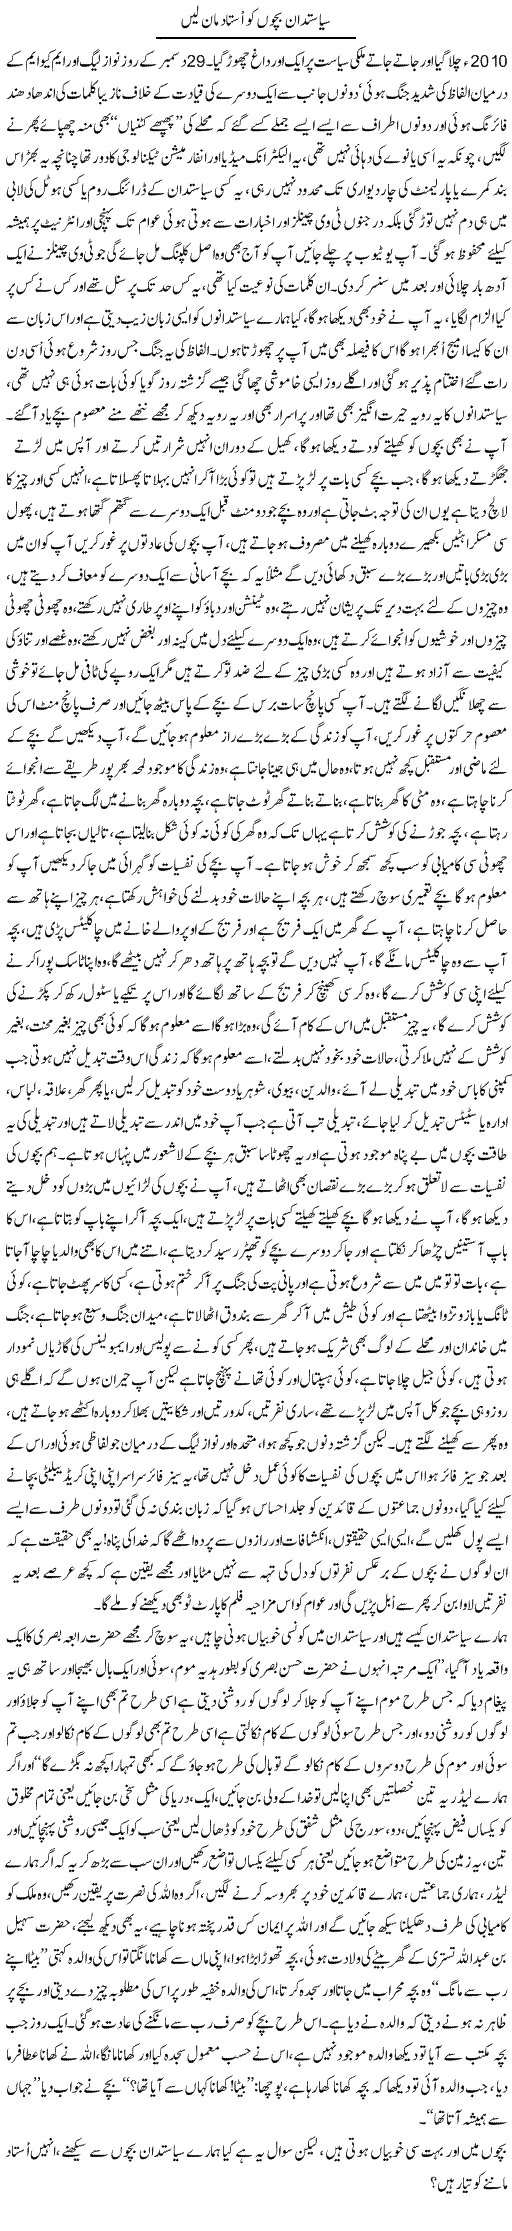 Kids and Politicians Express Column Amad Chaudhry 2 January 2011